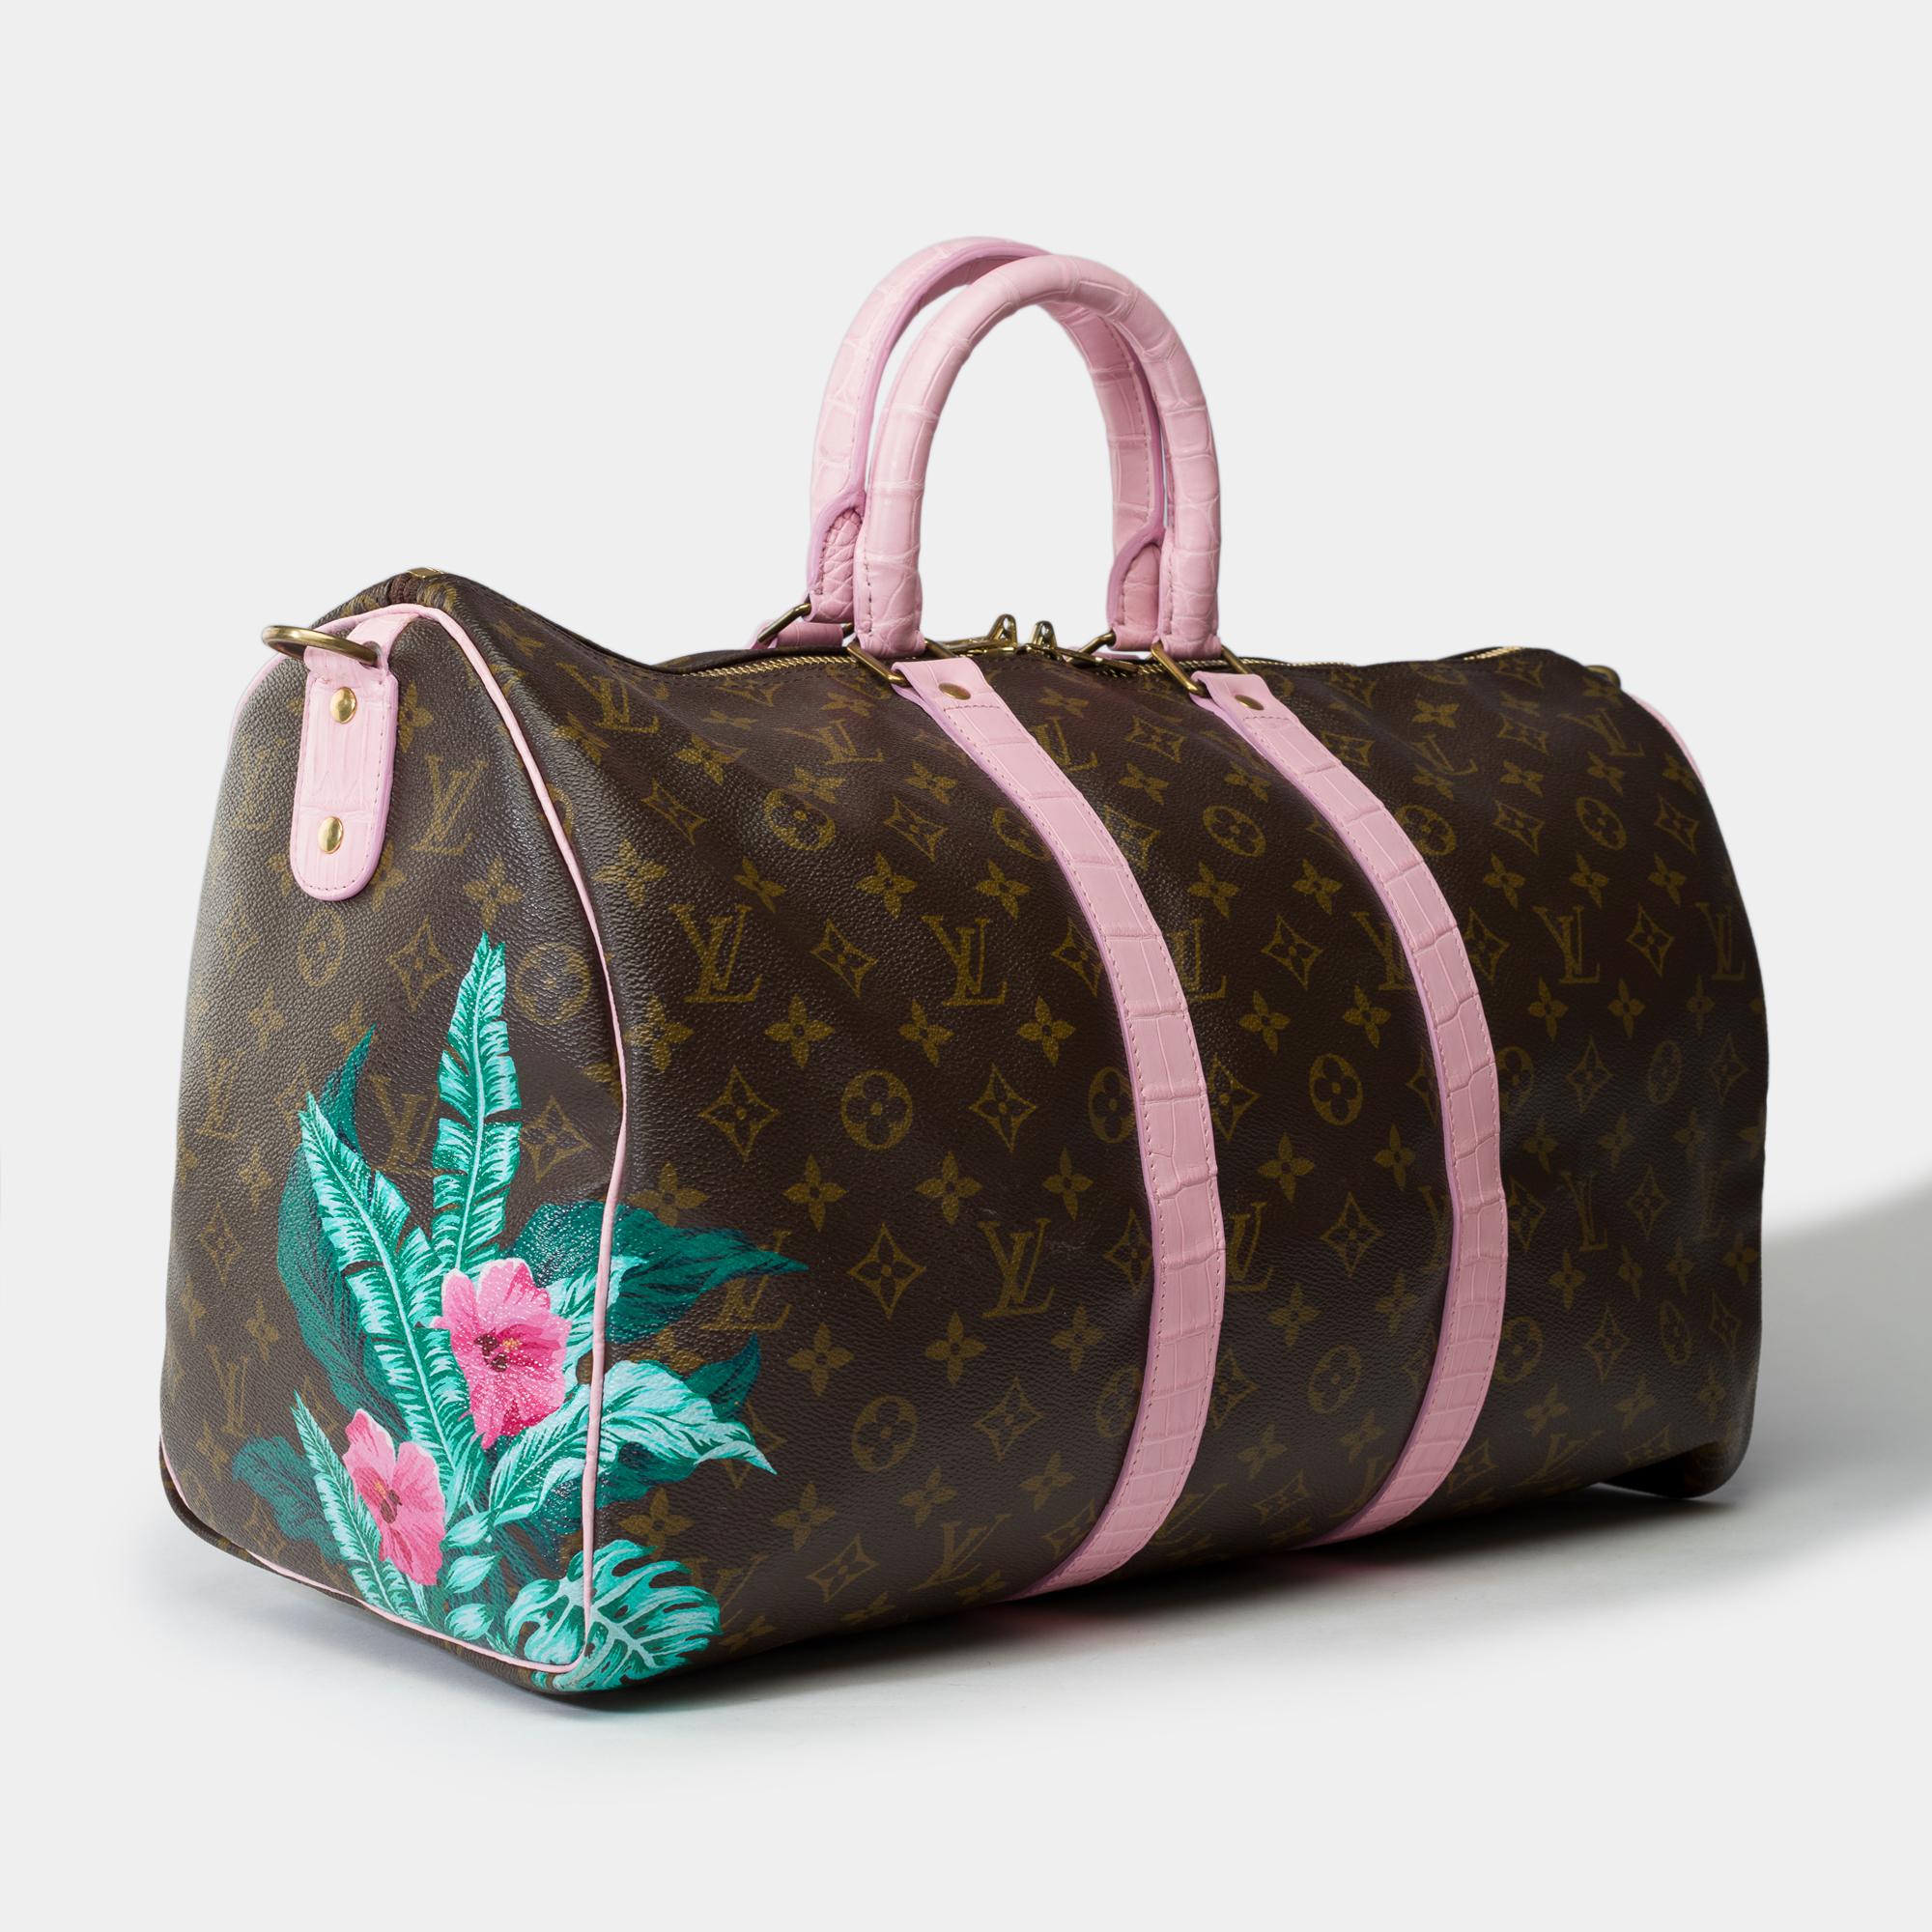 Exceptional​ ​and​ ​Unique​ ​Louis​ ​Vuitton​ ​Keepall​ ​45​ ​Travel​ ​Bag​ ​in​ ​Brown​ ​Monogram​ ​Coated​ ​Canvas​ ​Customized​ ​with​ ​Genuine​ ​Pink​ ​Crocodile​ ​Porosus​ ​Leather​ ​at​ ​Handles​ ​and​ ​on​ ​Belly​ ​Bands

Gilt​ ​metal​